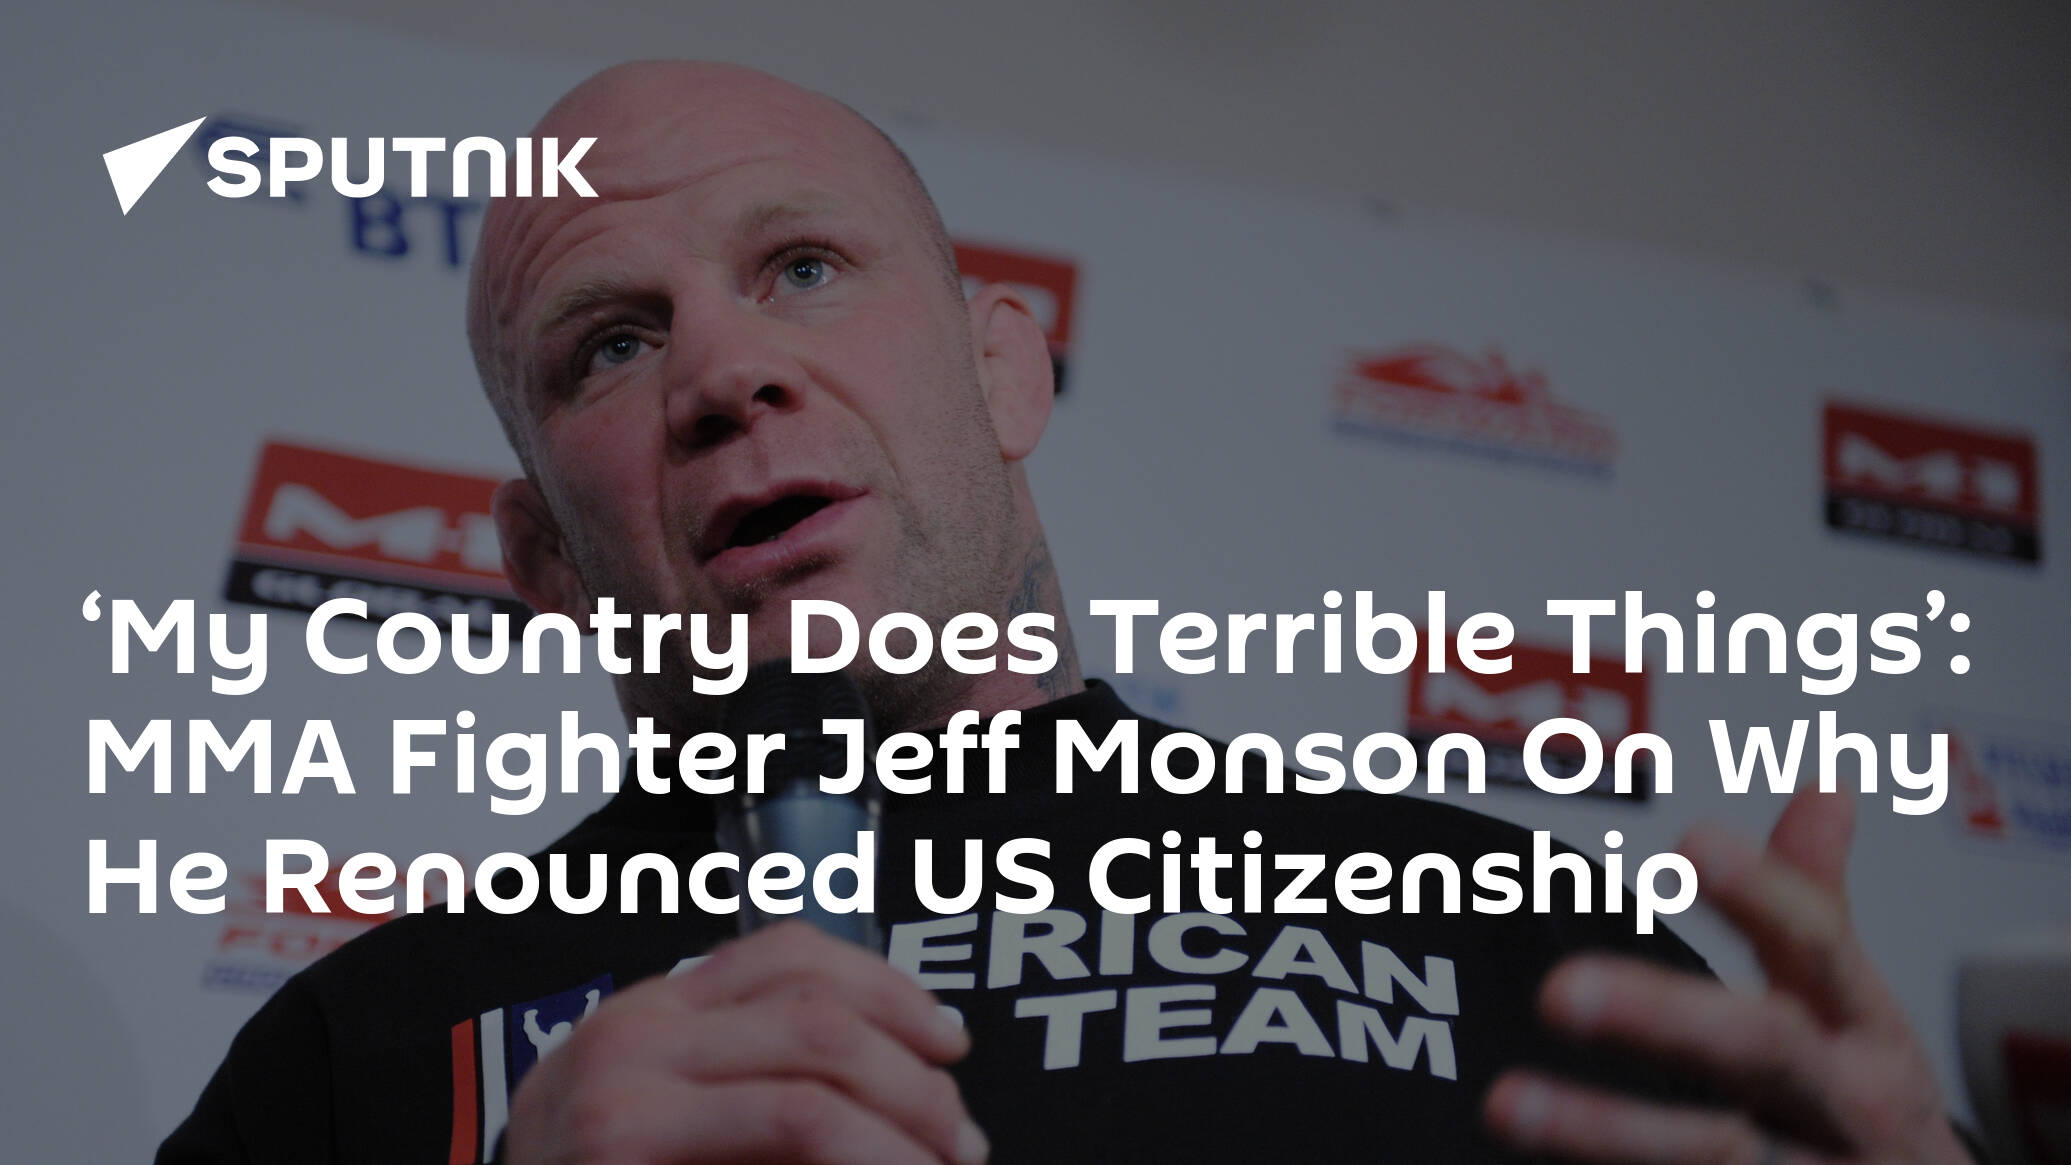 ‘My Country Does Terrible Things’: MMA Fighter Jeff Monson On Why He Renounced US Citizenship